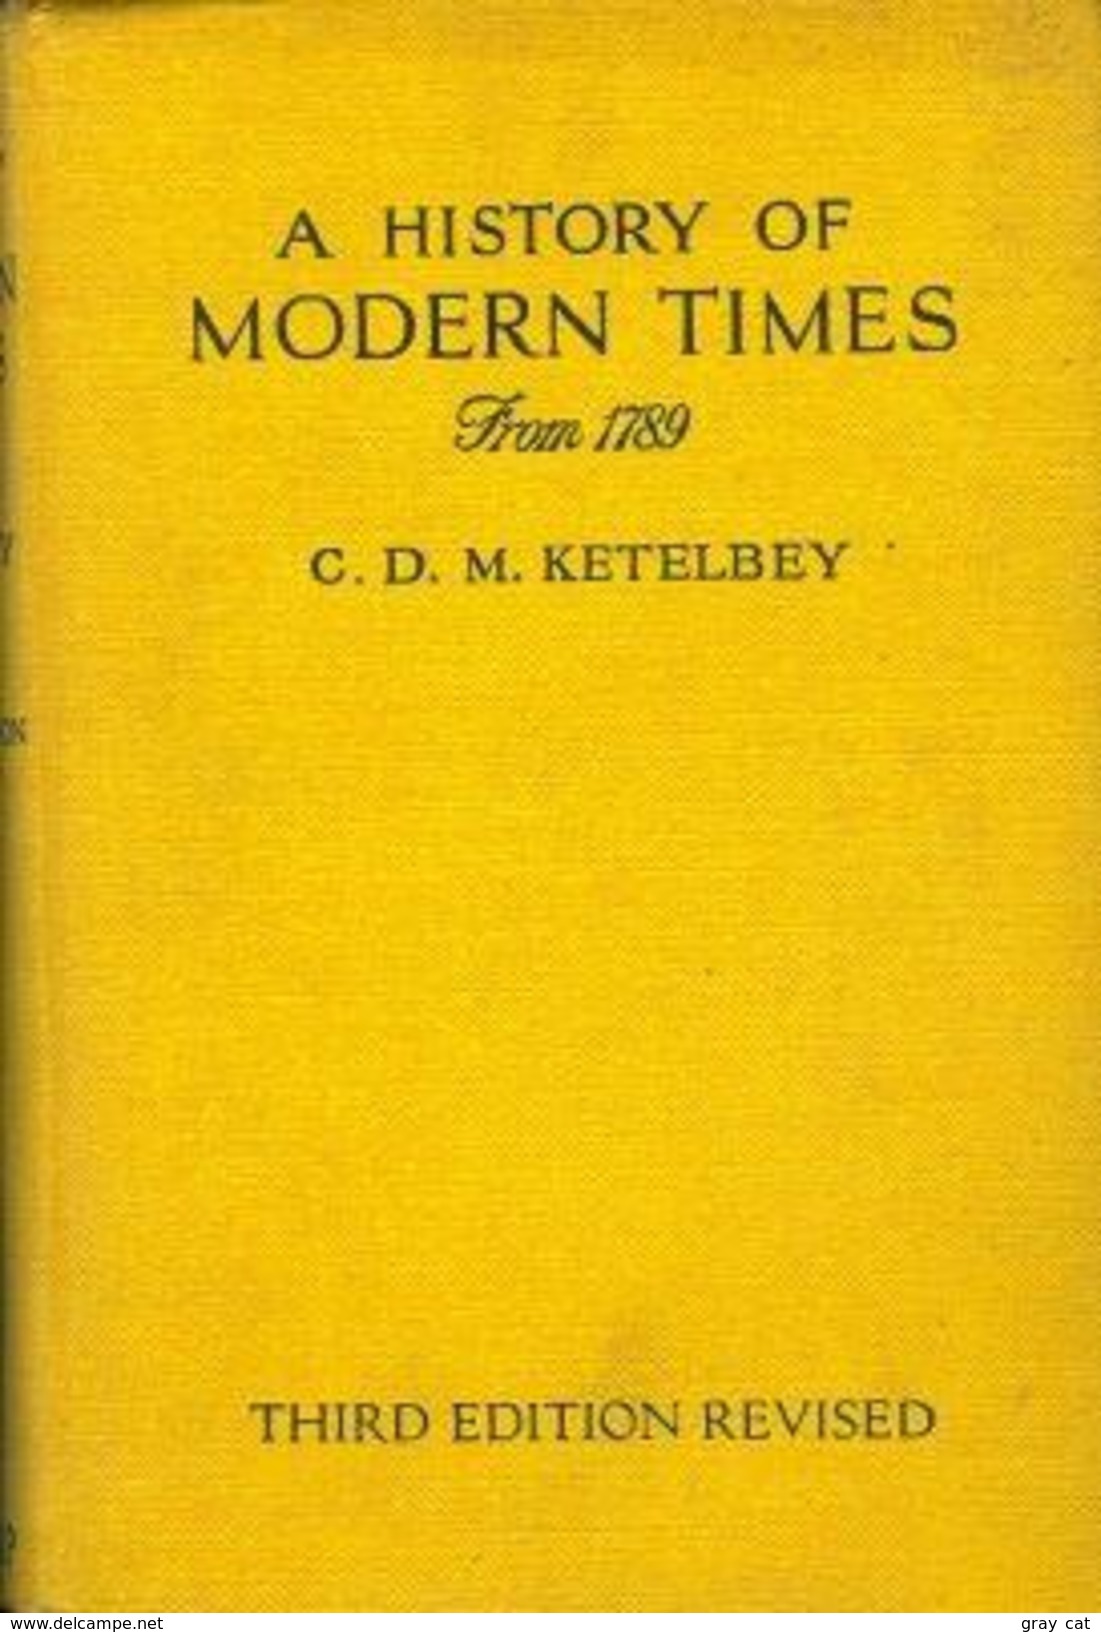 A History Of Modern Times From 1789 (Third Edition) By C. D. M. Ketelbey - World